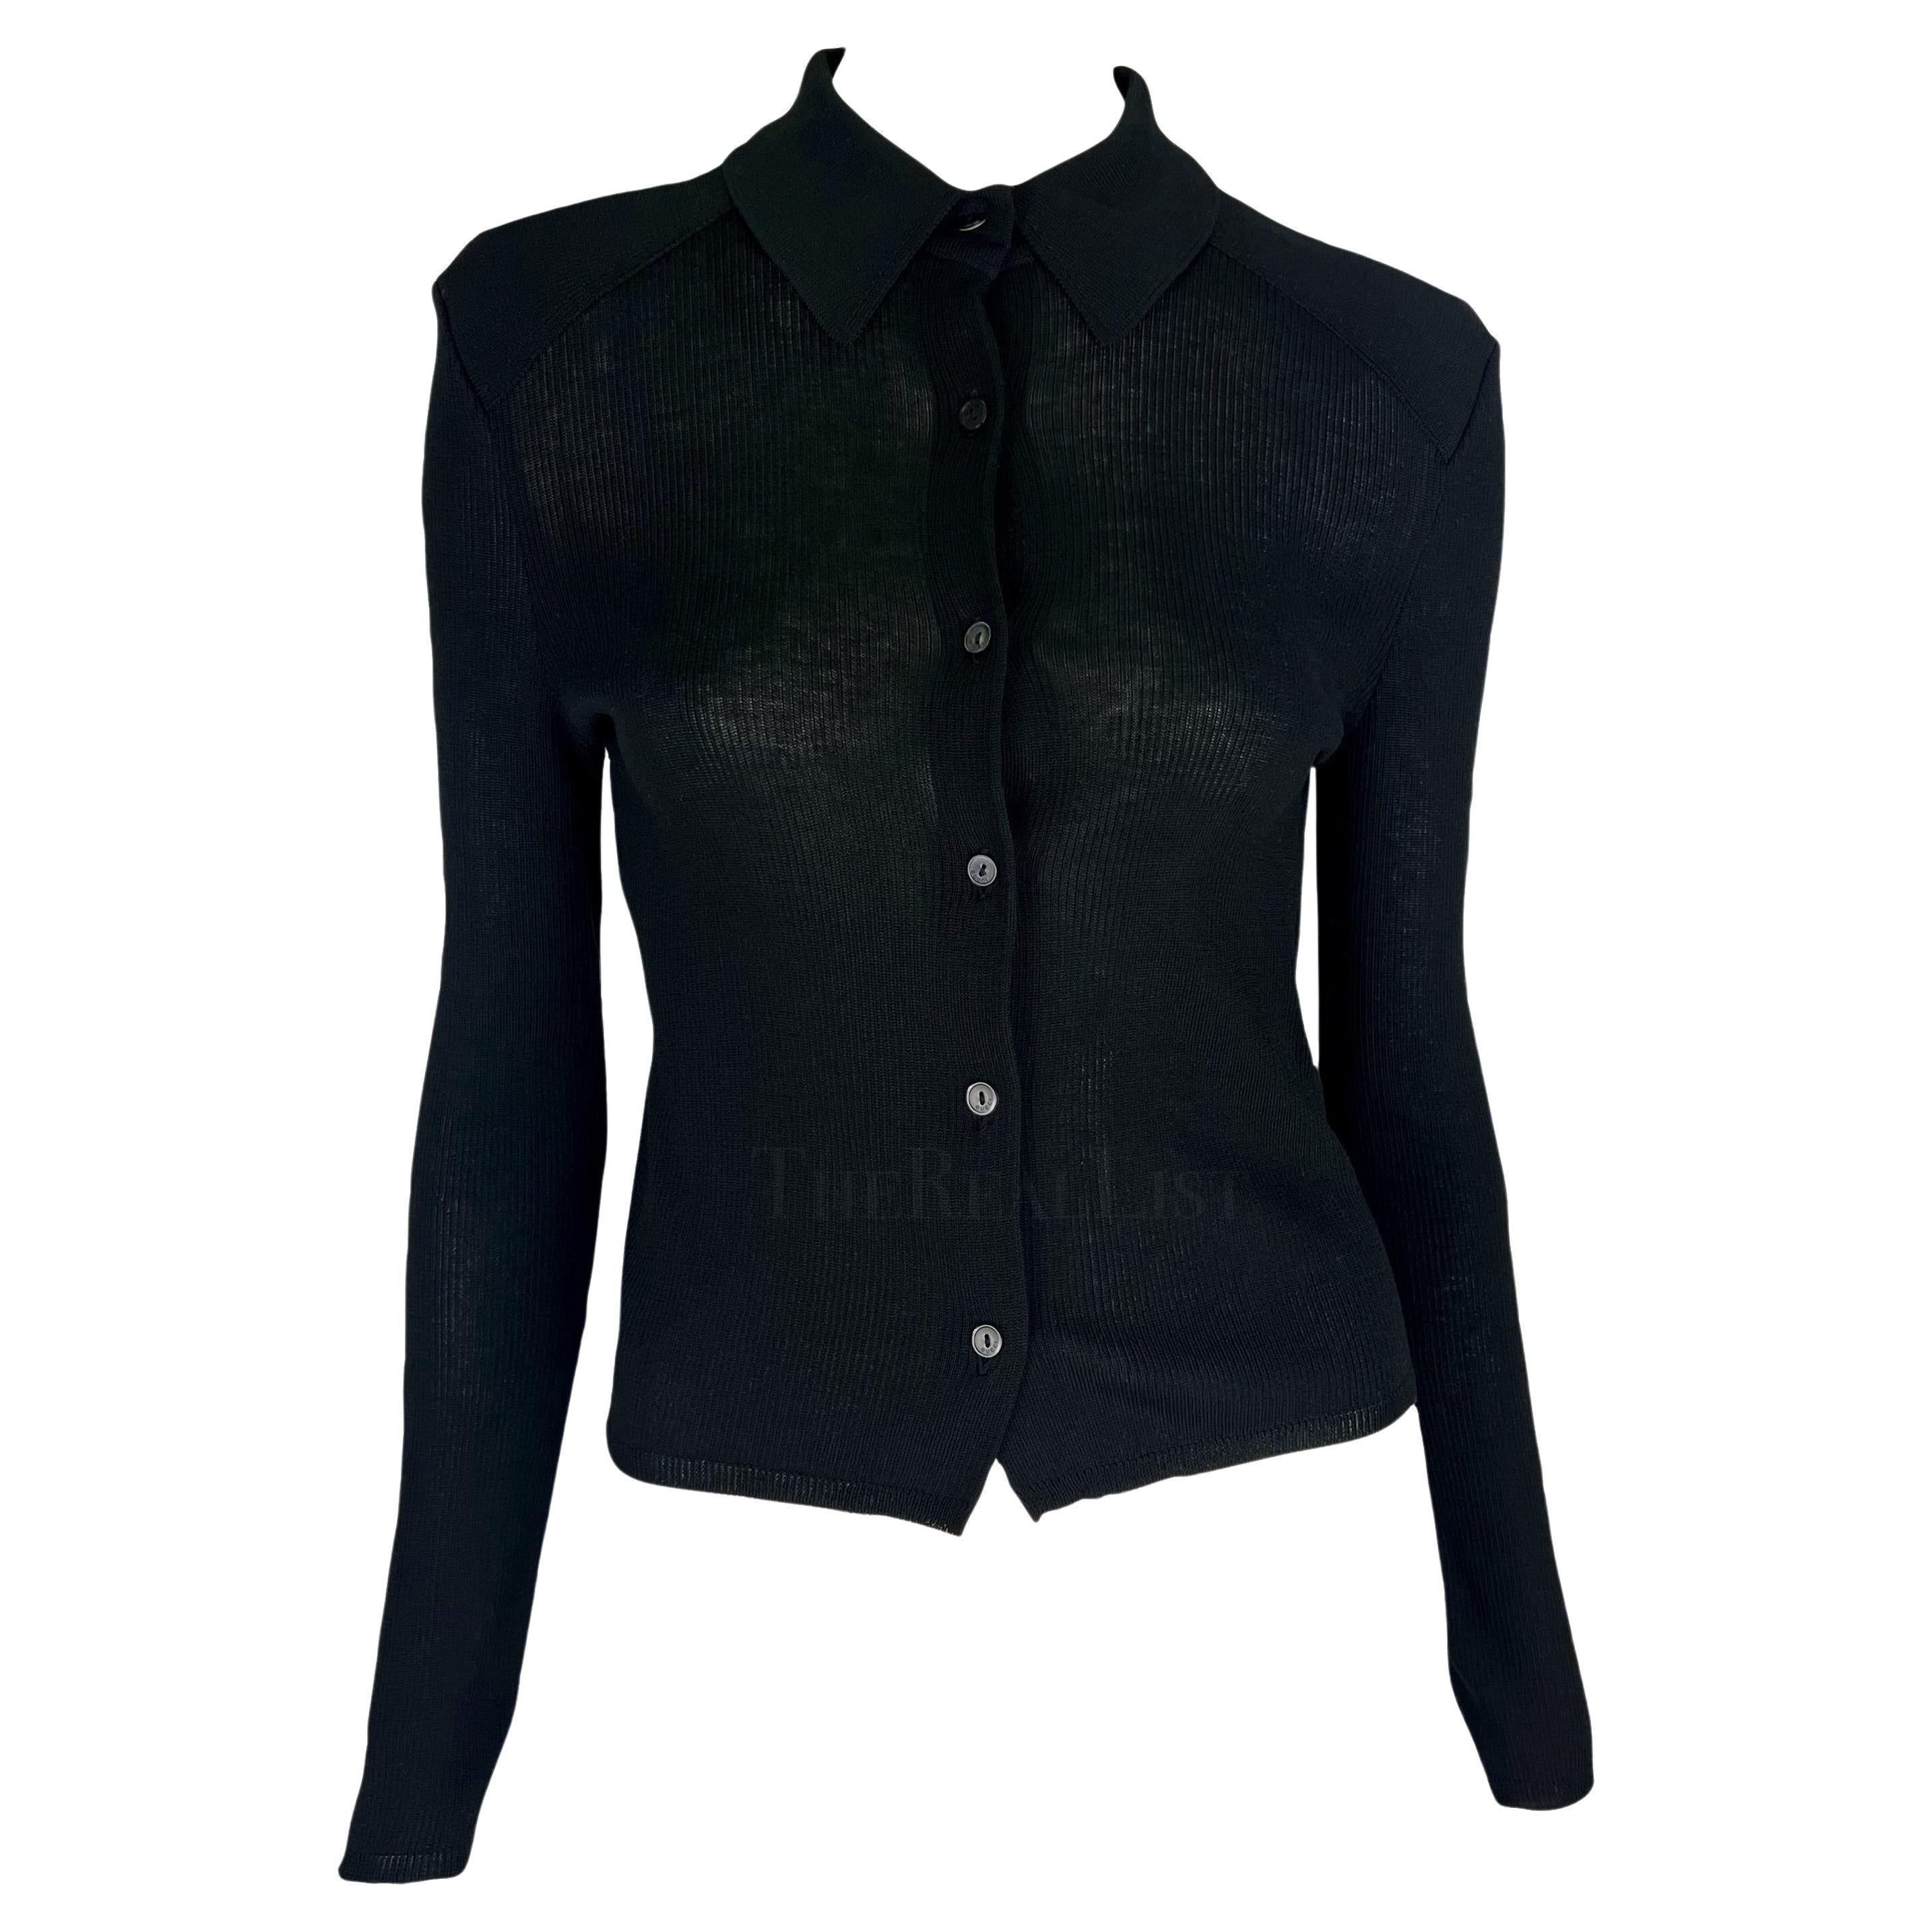 1998 Gucci by Tom Ford Semi-Sheer Ribbed Stretch Sheer Knit Black Button-Up Top